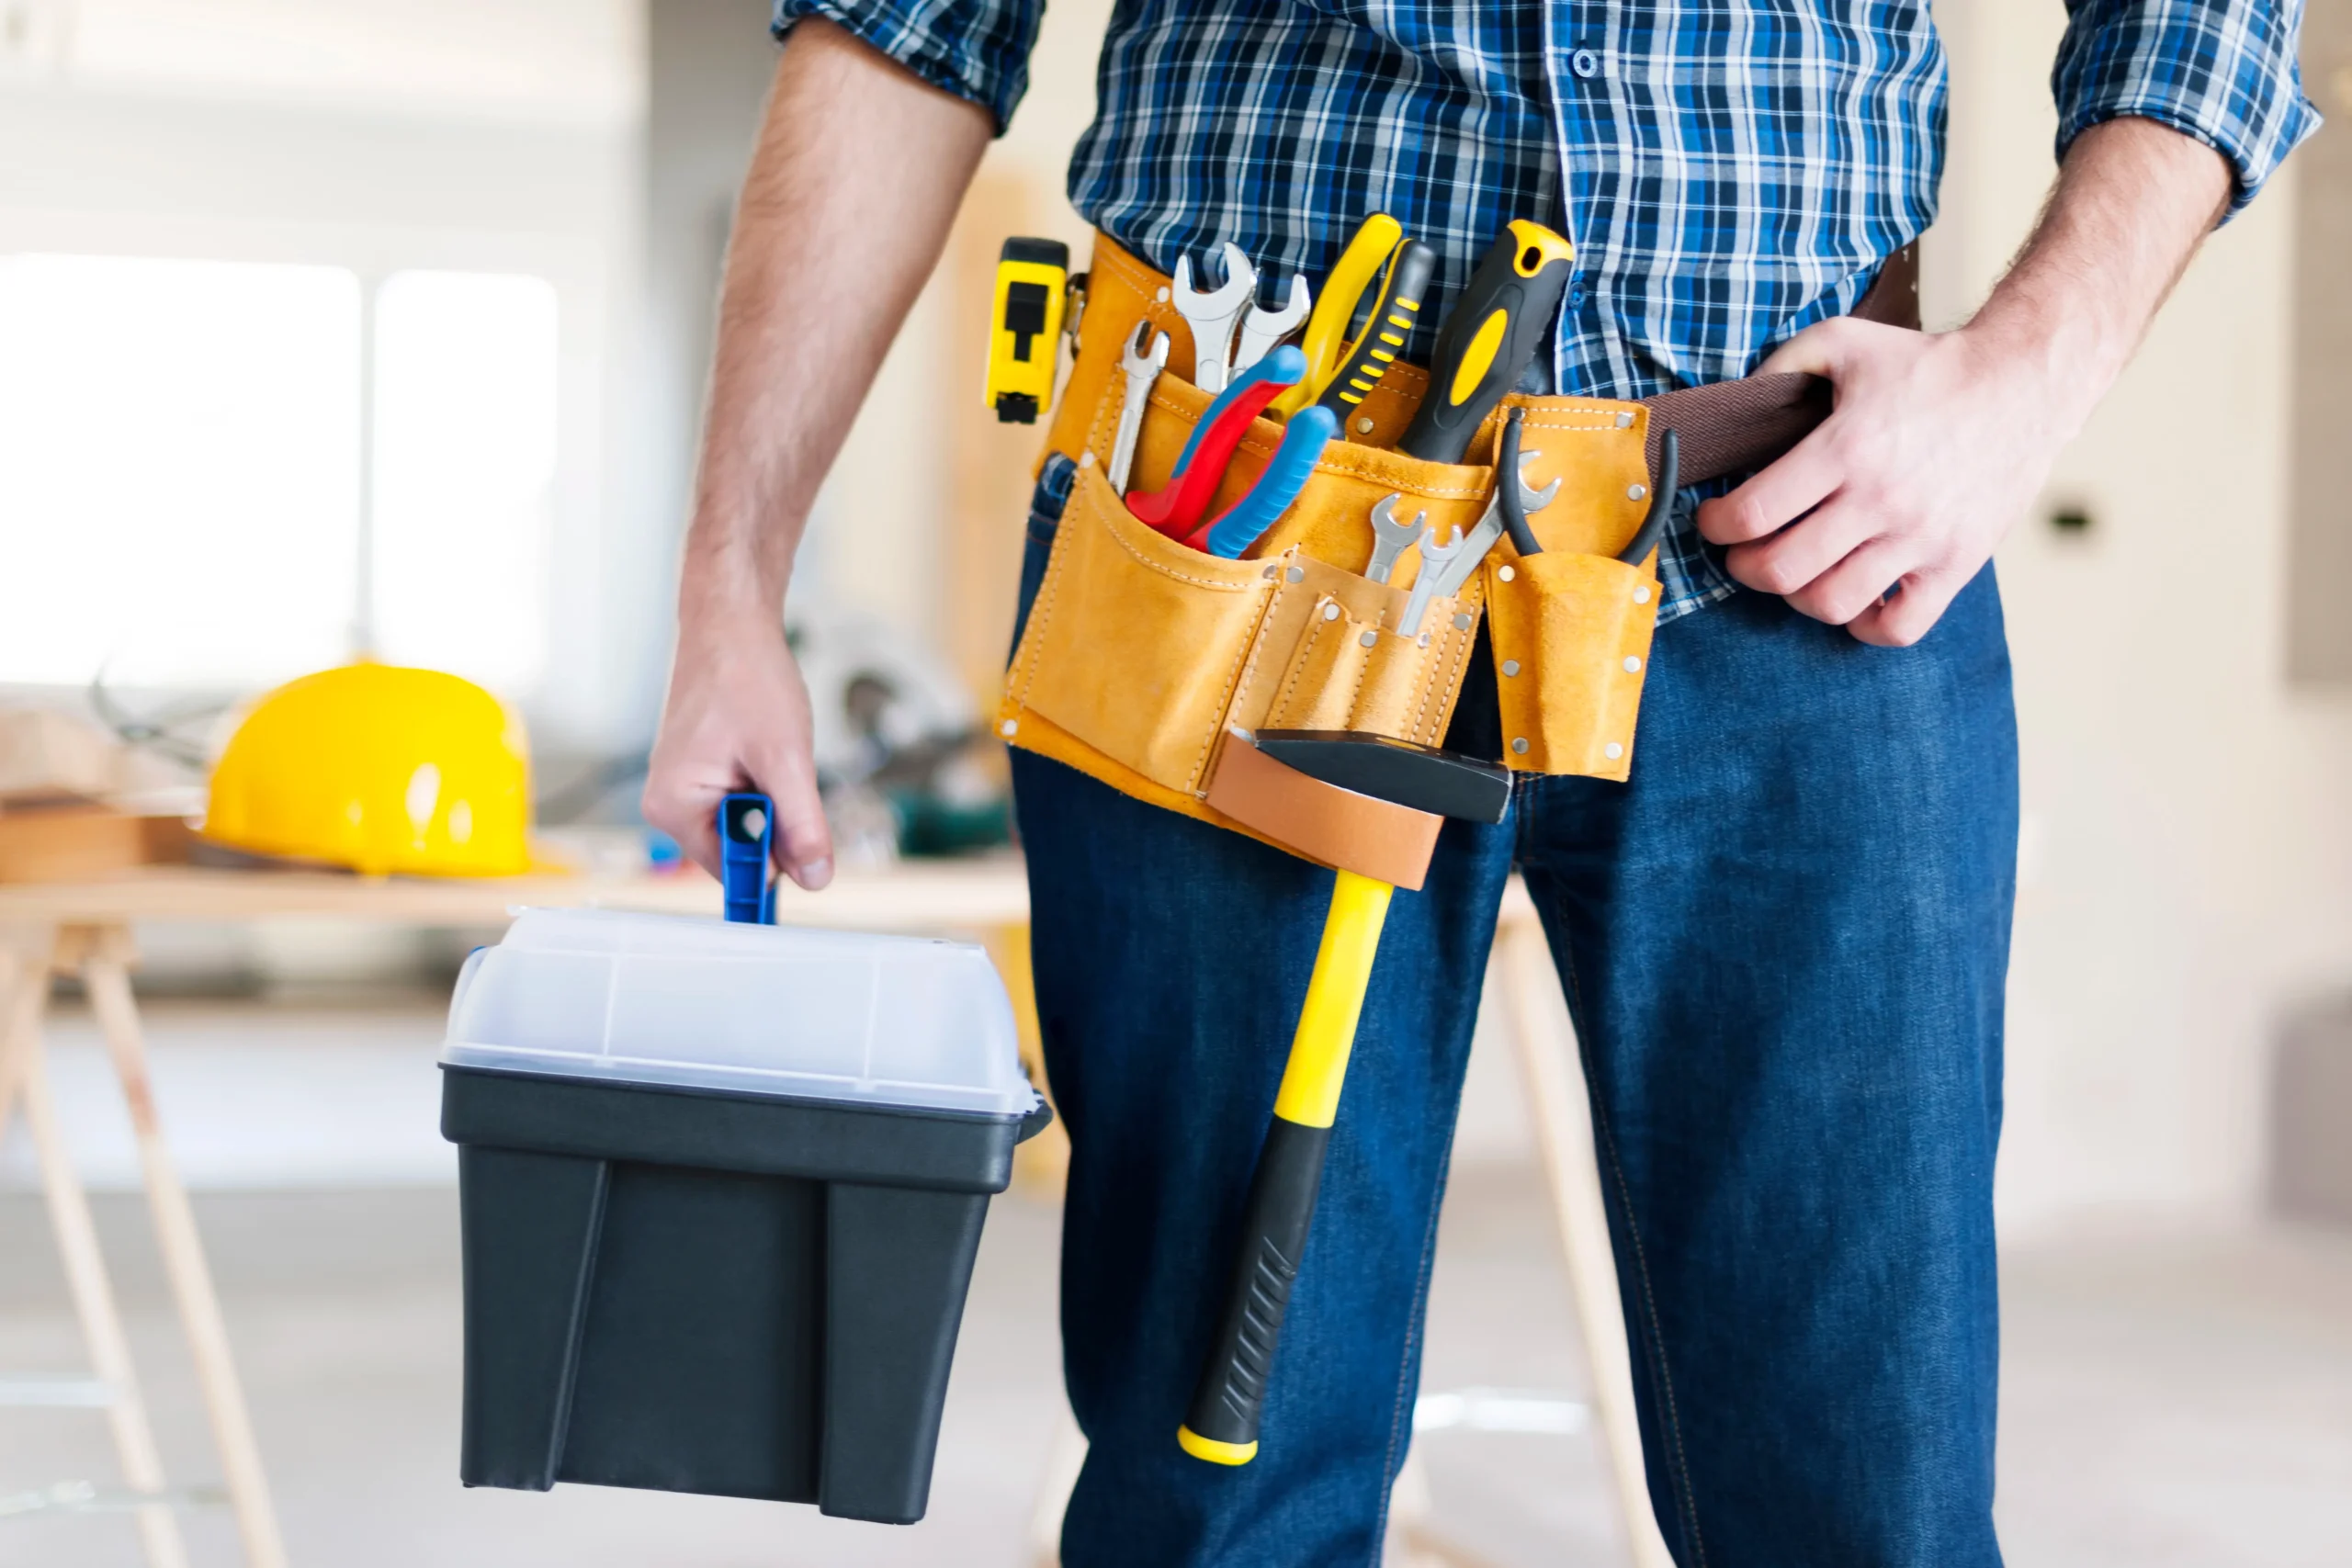 Why You Need Property Maintenance and Handyman Services When You Move